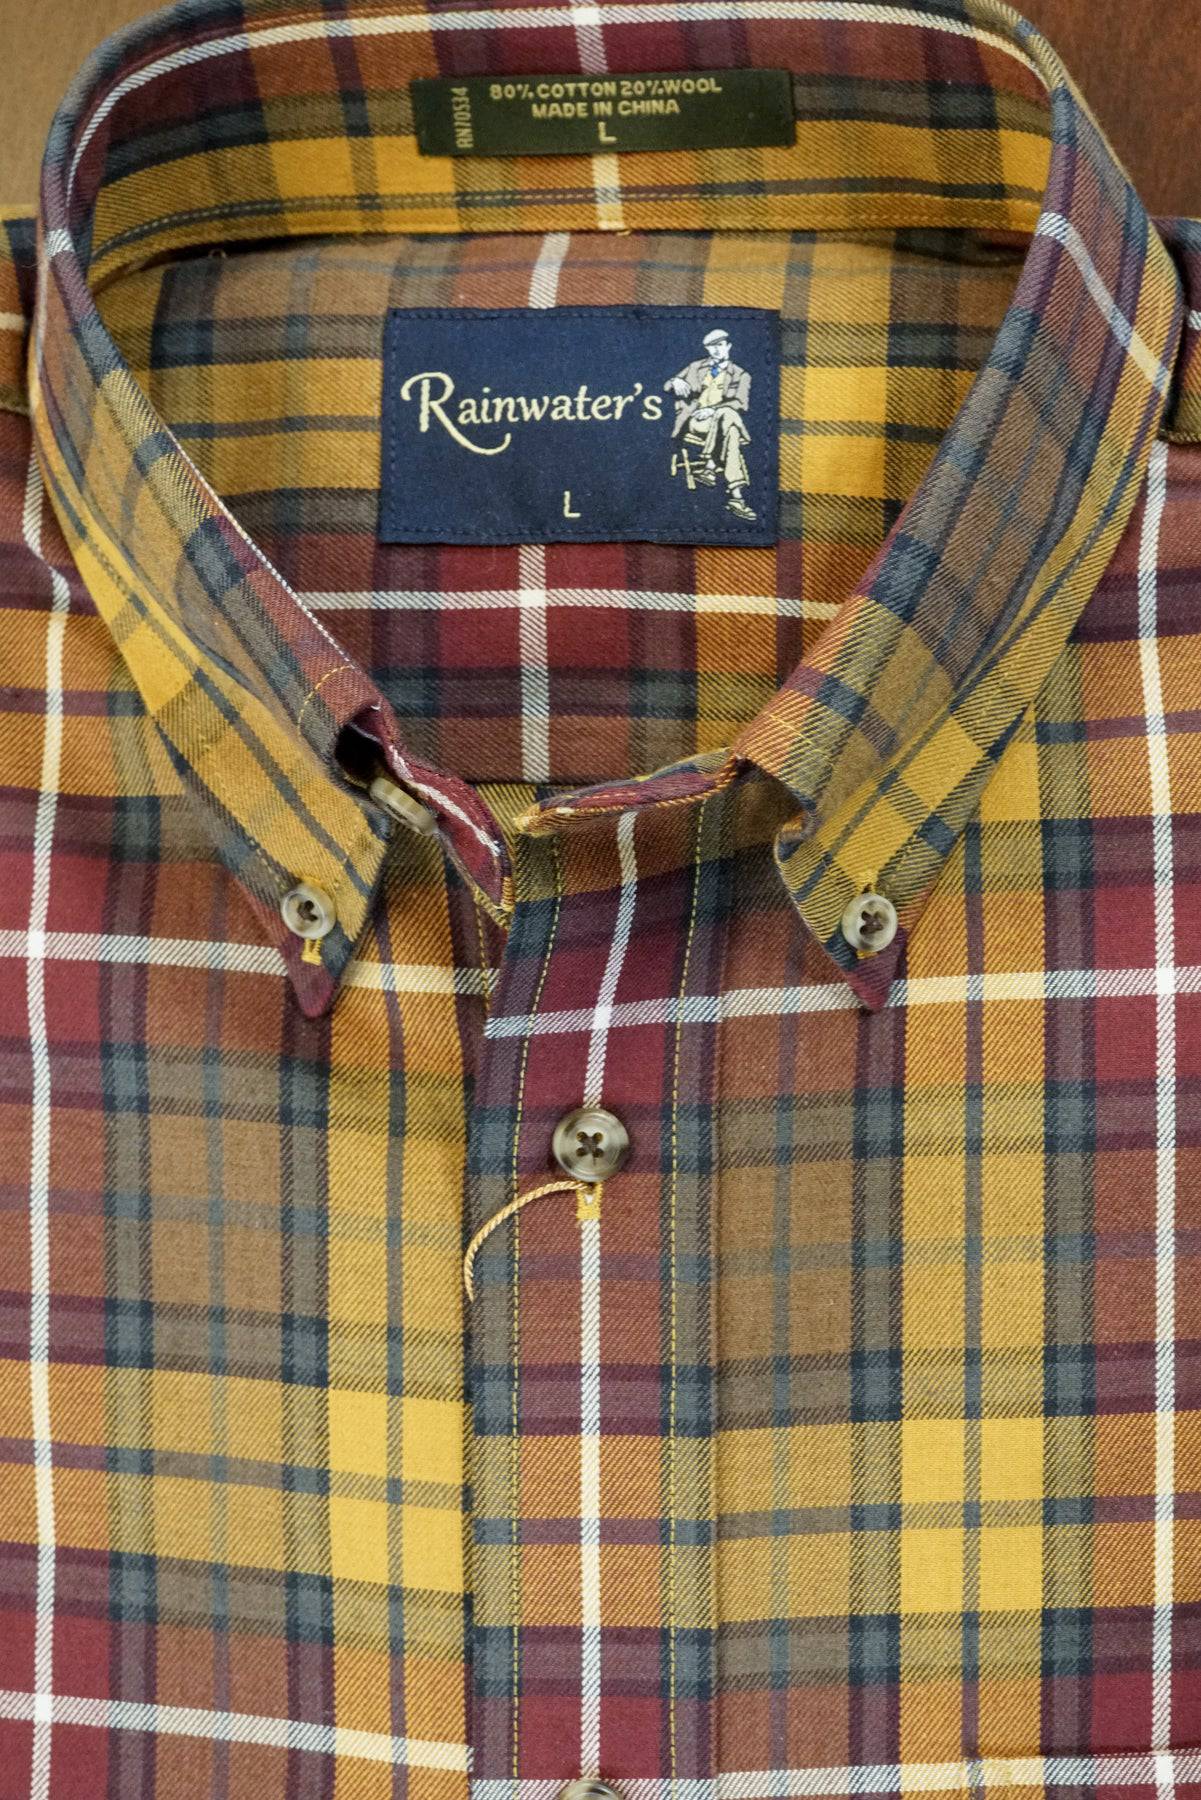 Burgundy and Gold Plaid Button Down in Cotton & Wool by Rainwater's - Rainwater's Men's Clothing and Tuxedo Rental